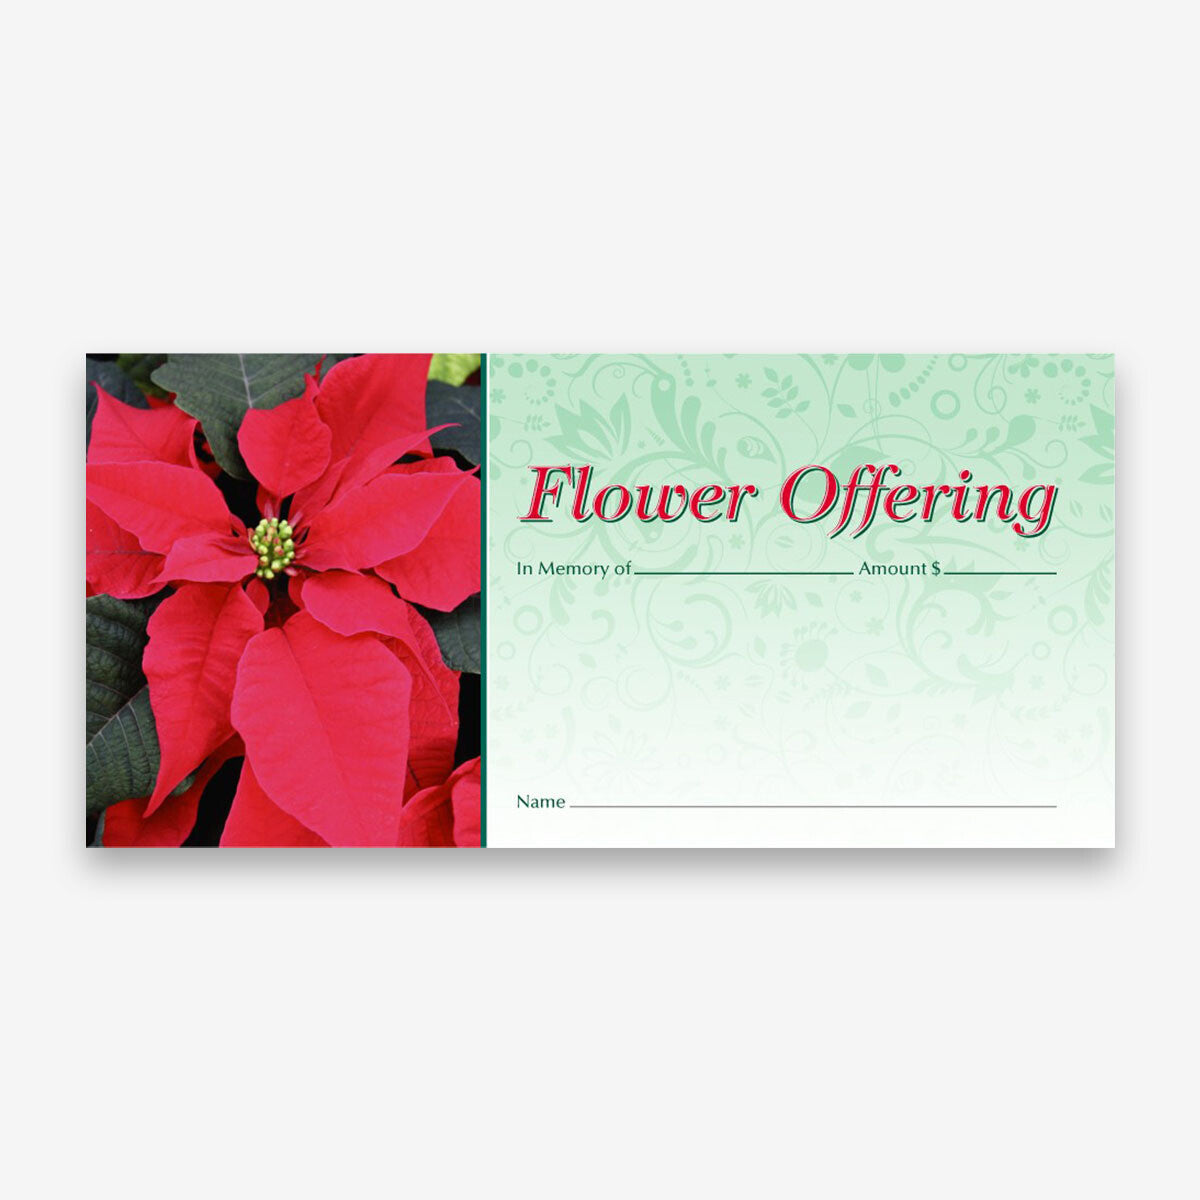 NCS National Church Solutions Premium Christmas Flower Offering Envelope 2